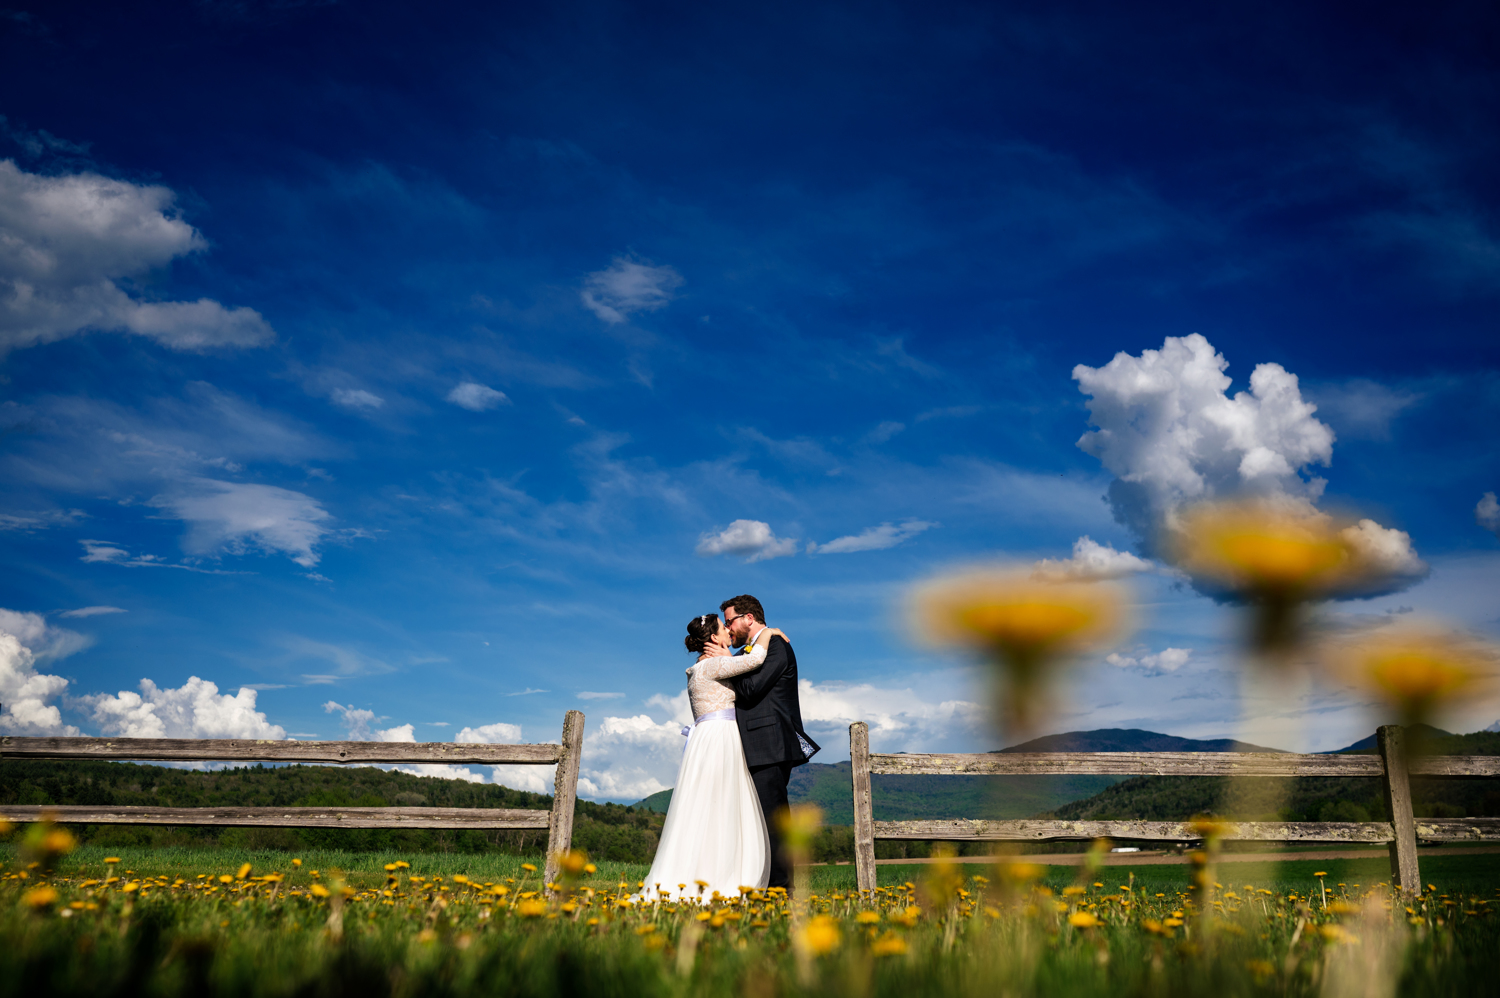 Anne and Jed standing together and kissing at their wedding venue with mountain views in Vermont